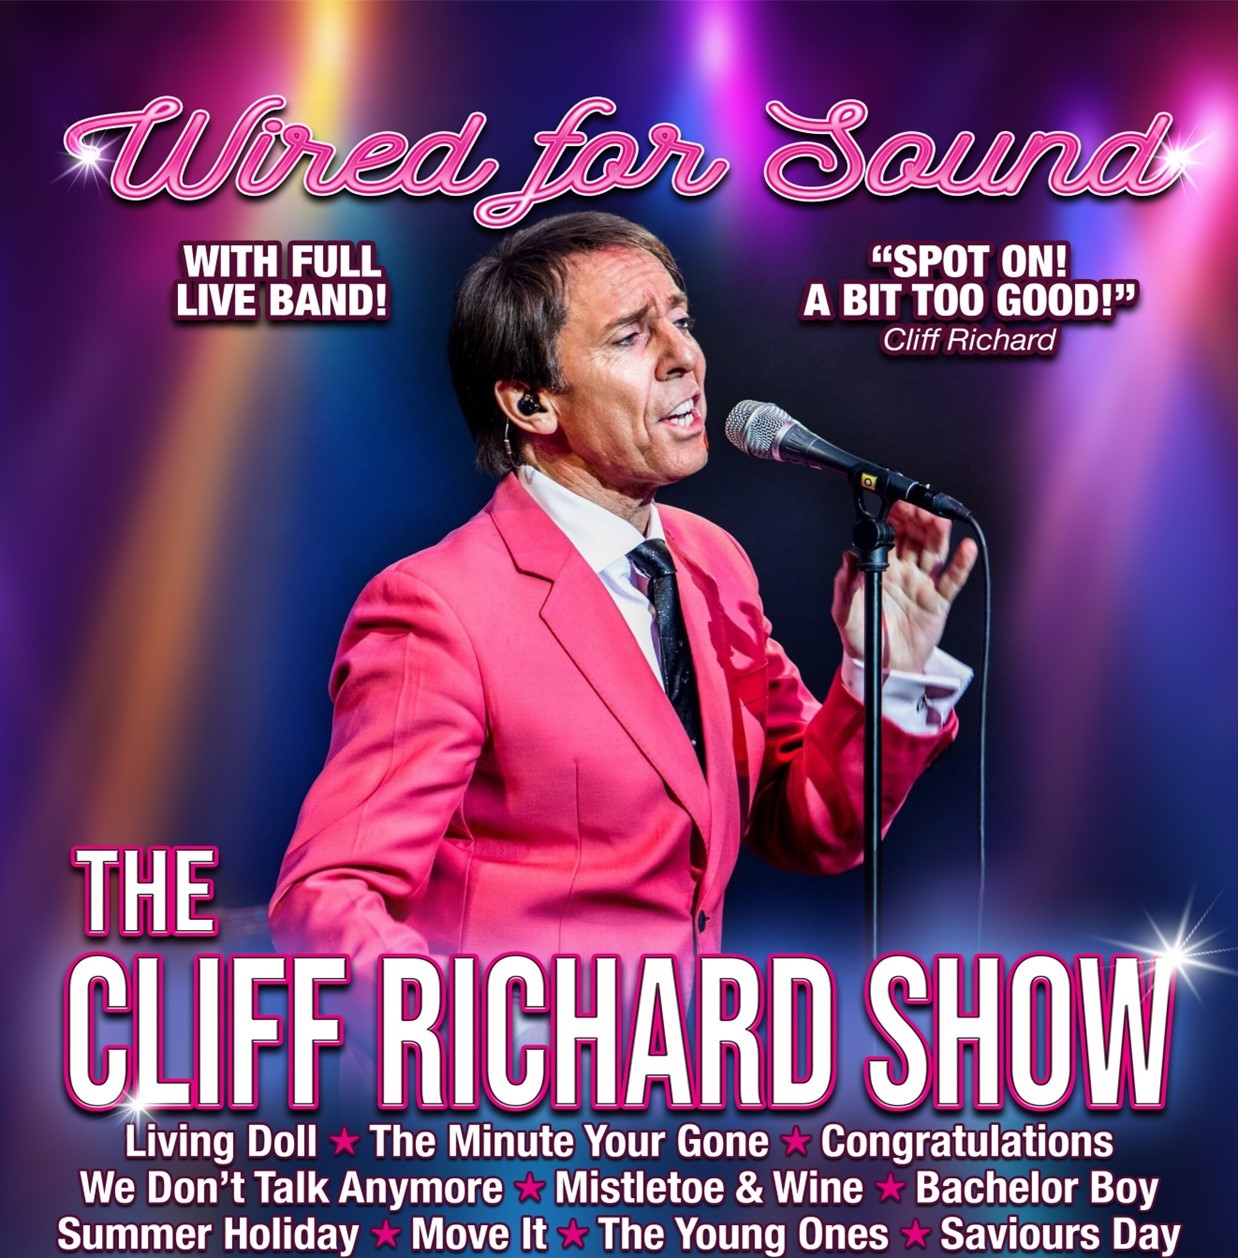 Wired For Sound The Cliff Richard Tribute Show on Nov 08, 19:30@Standard capacity - Pick a seat, Buy tickets and Get information on Sutton Coldfield Town Hall 